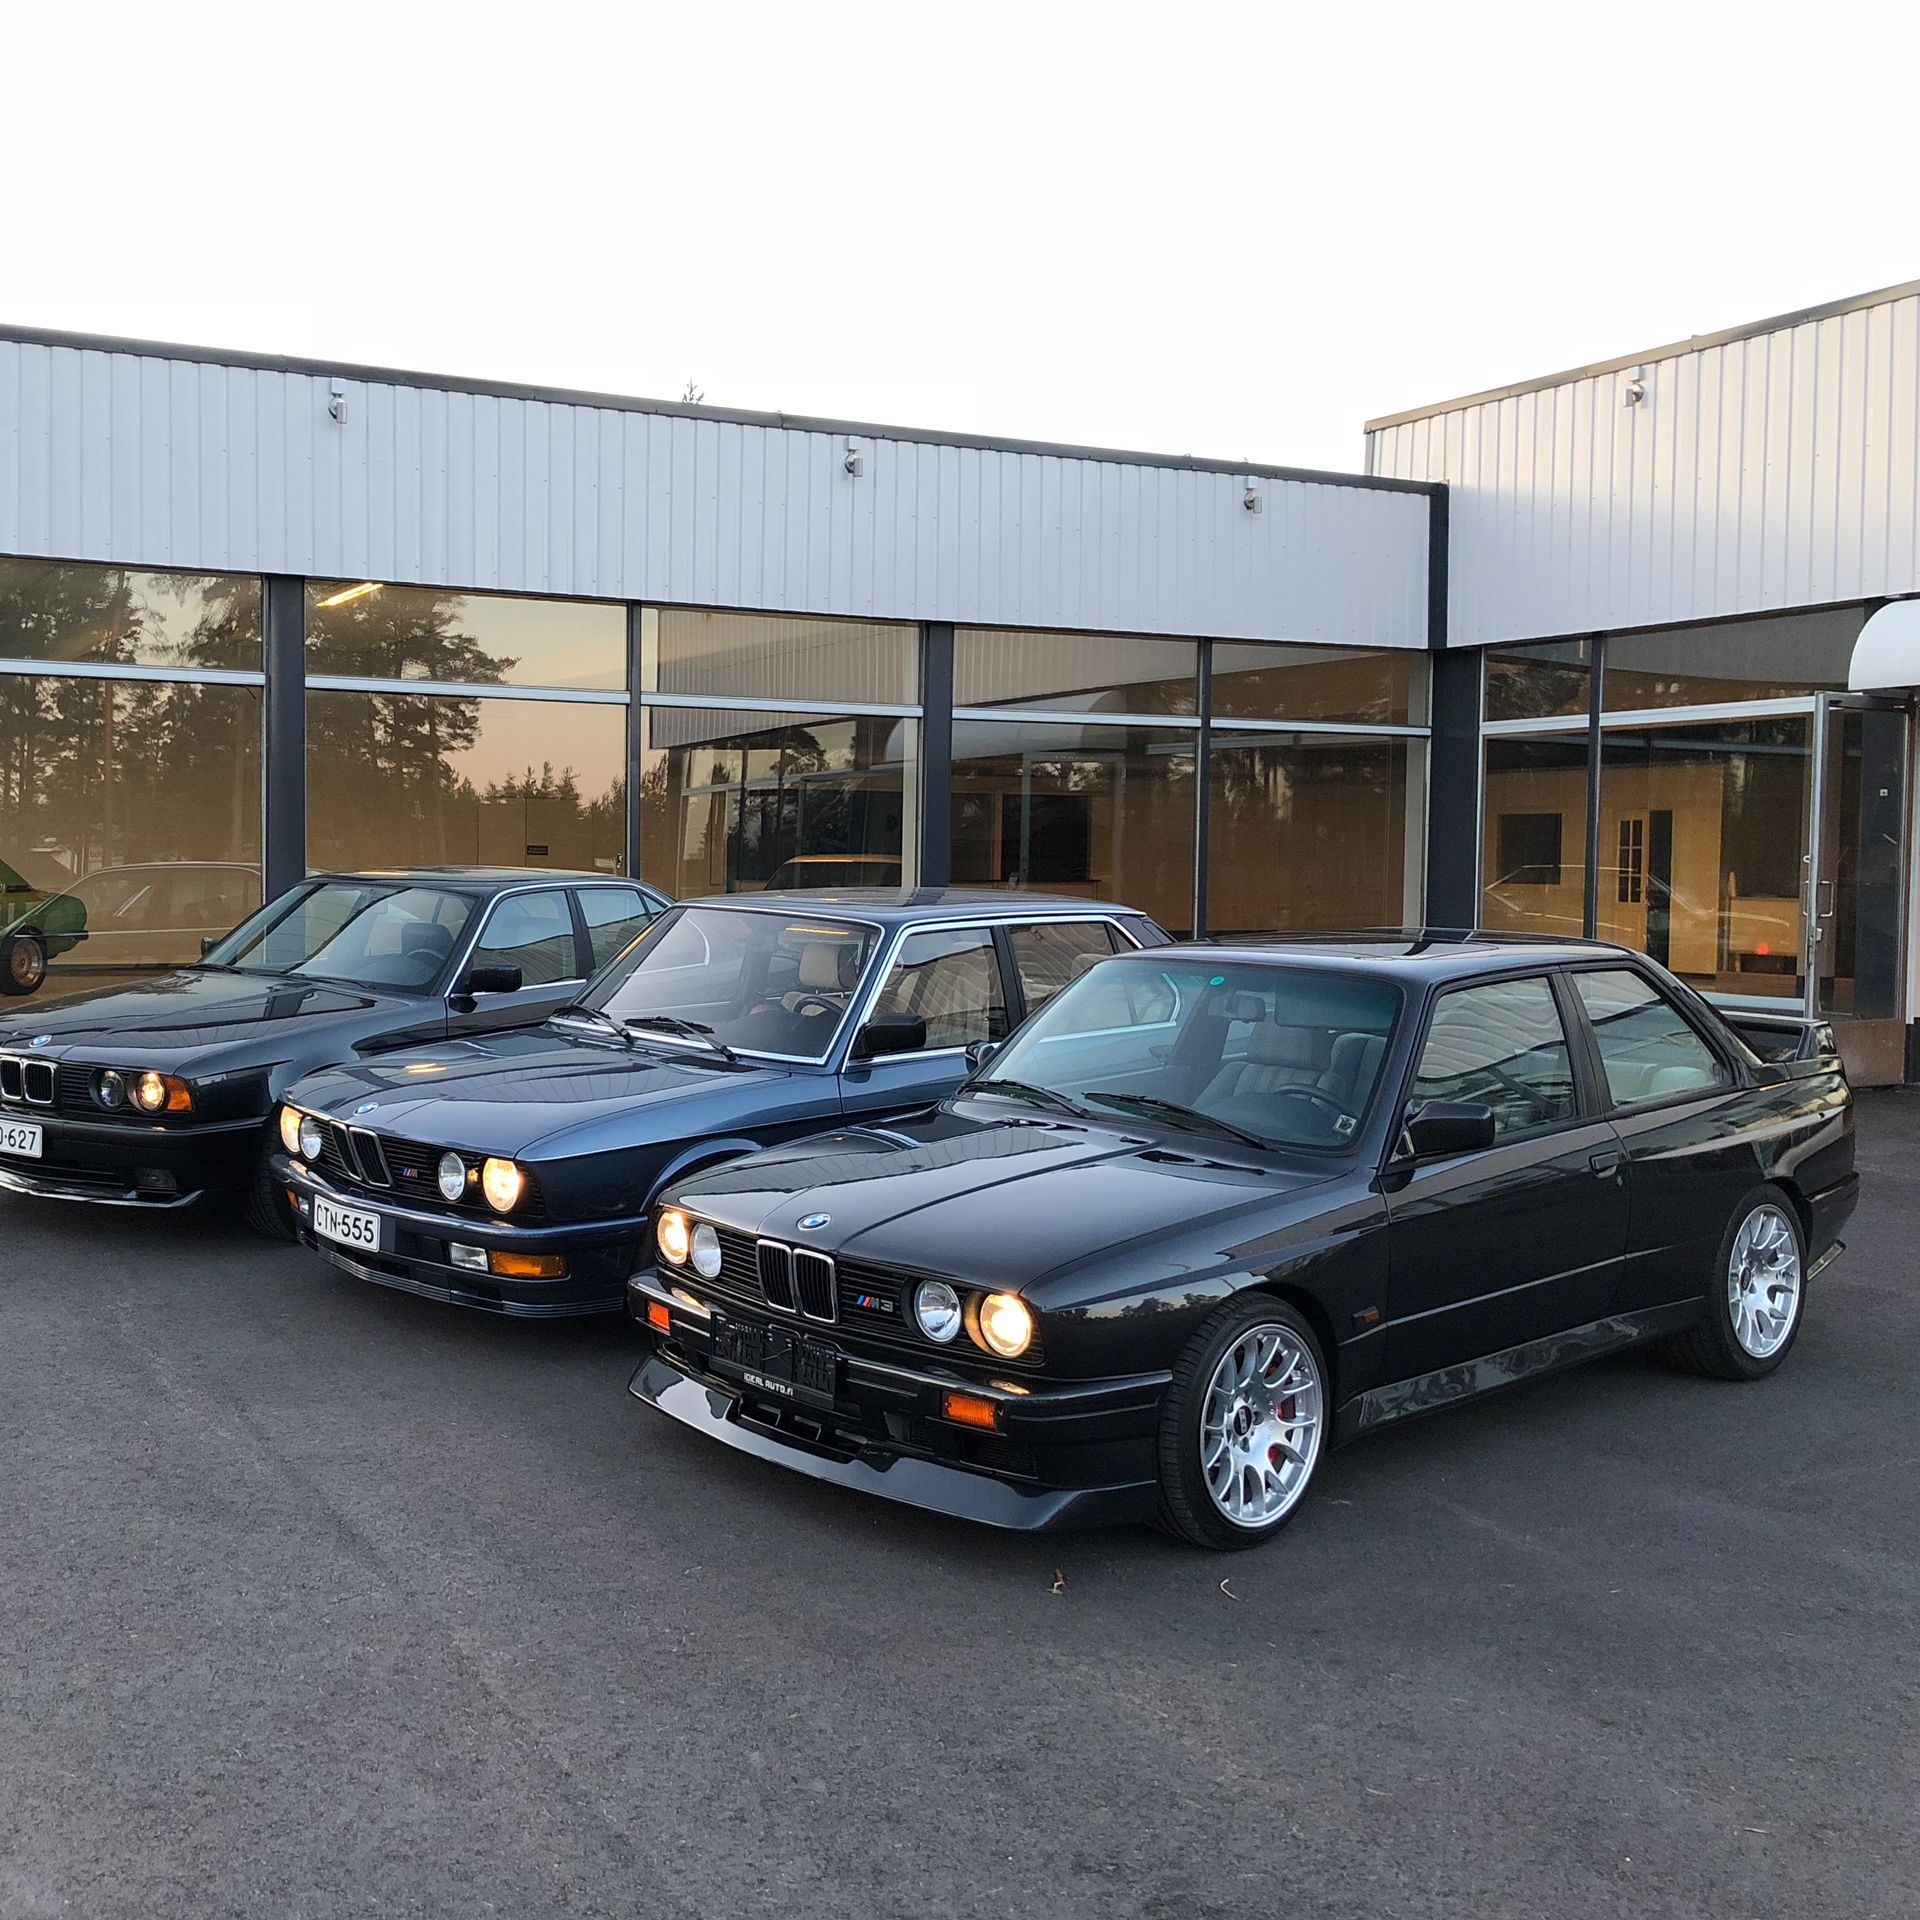 We wish you luck with classic BMWs